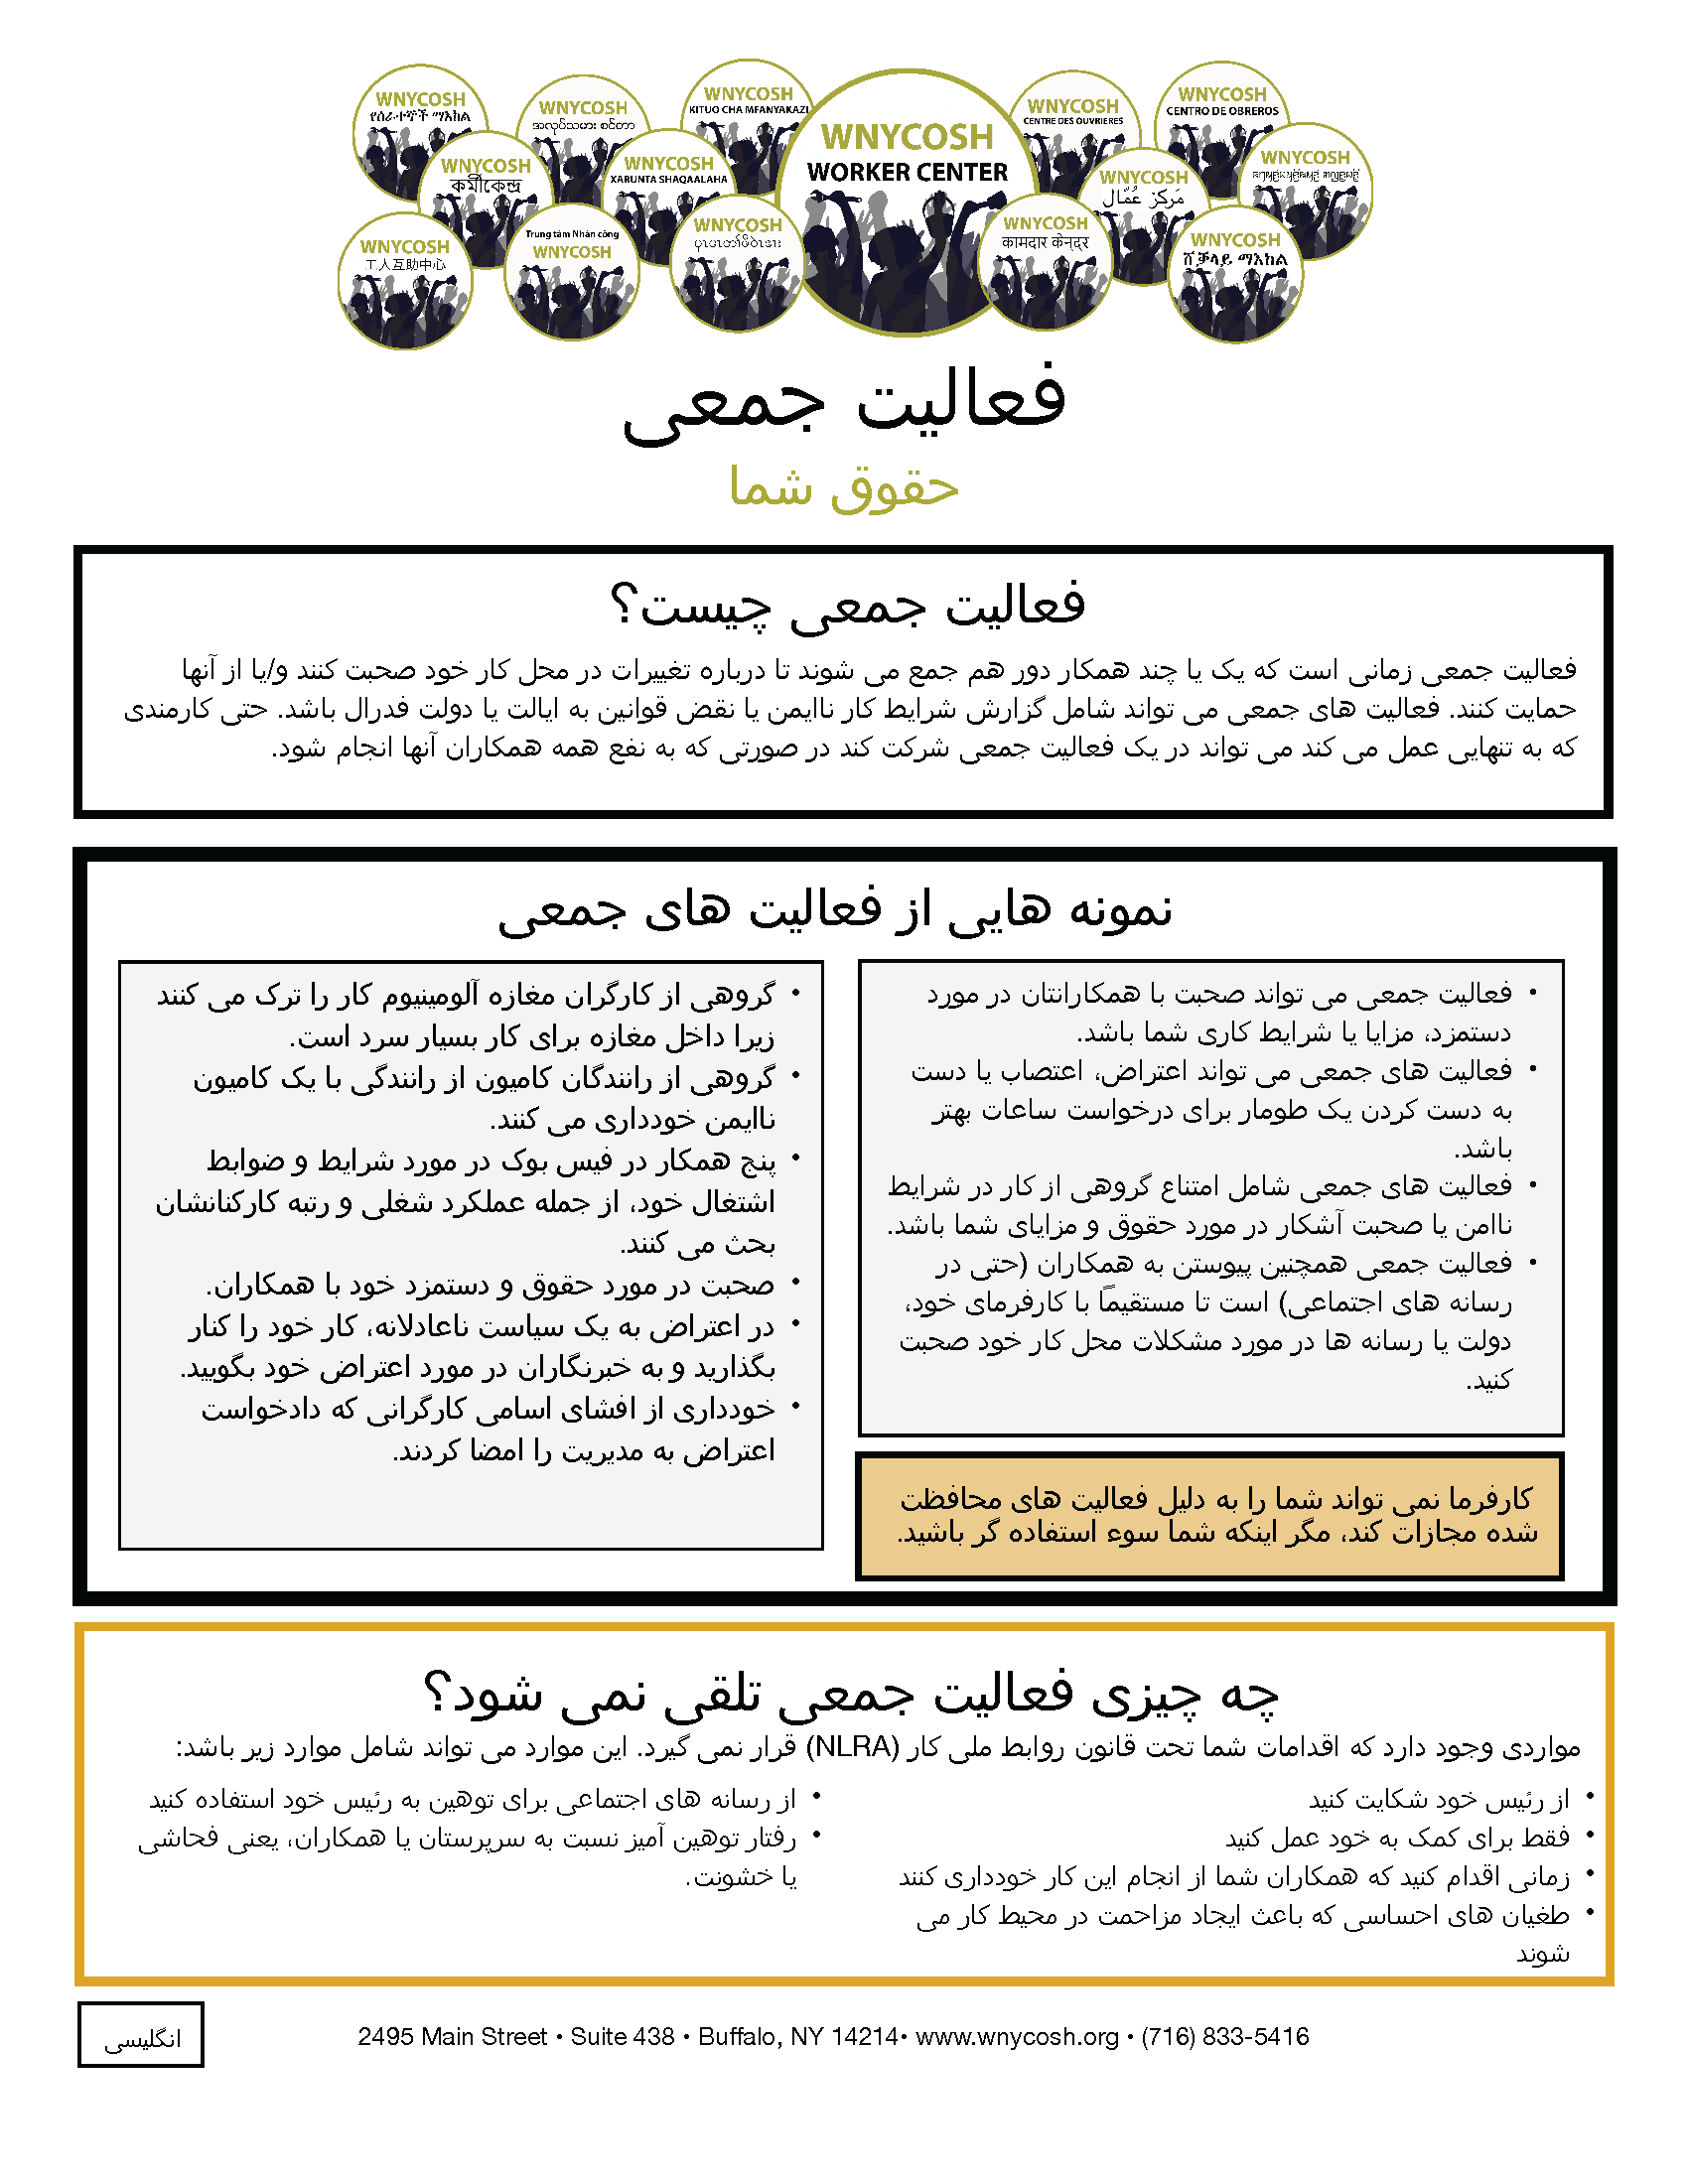 Thumbnail for Concerted Activity Factsheet in Farsi